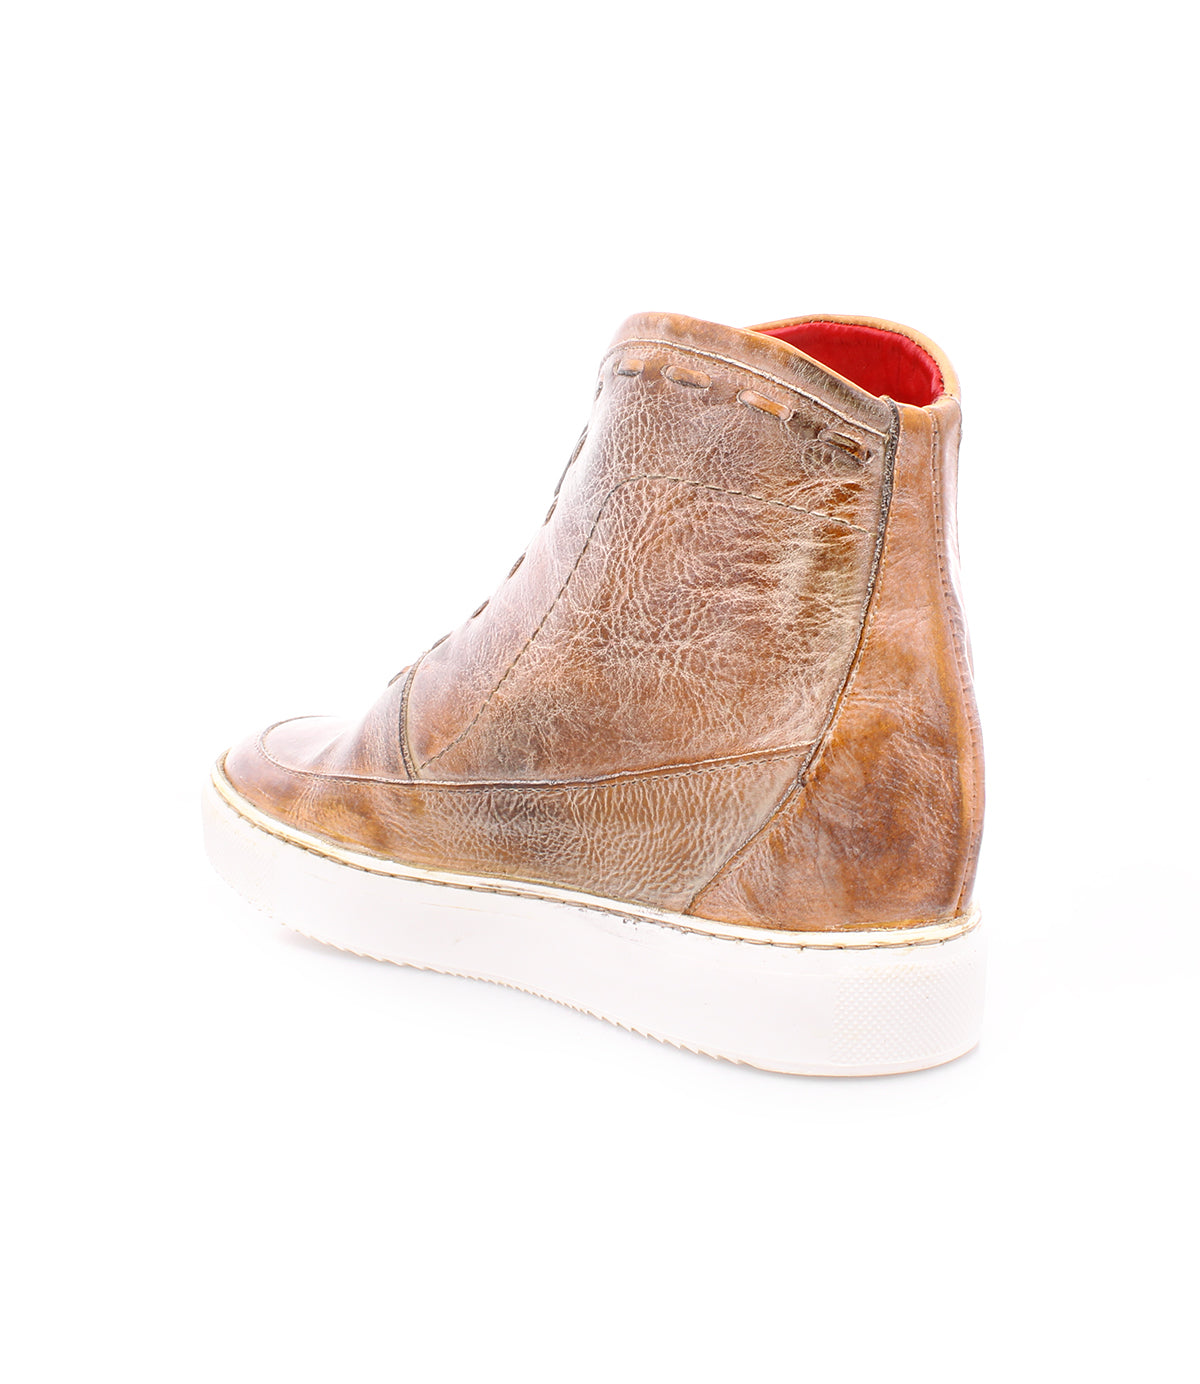 A women's brown leather high top sneaker named Joyce by Bed Stu, on a white background, offering both convenience and comfort.